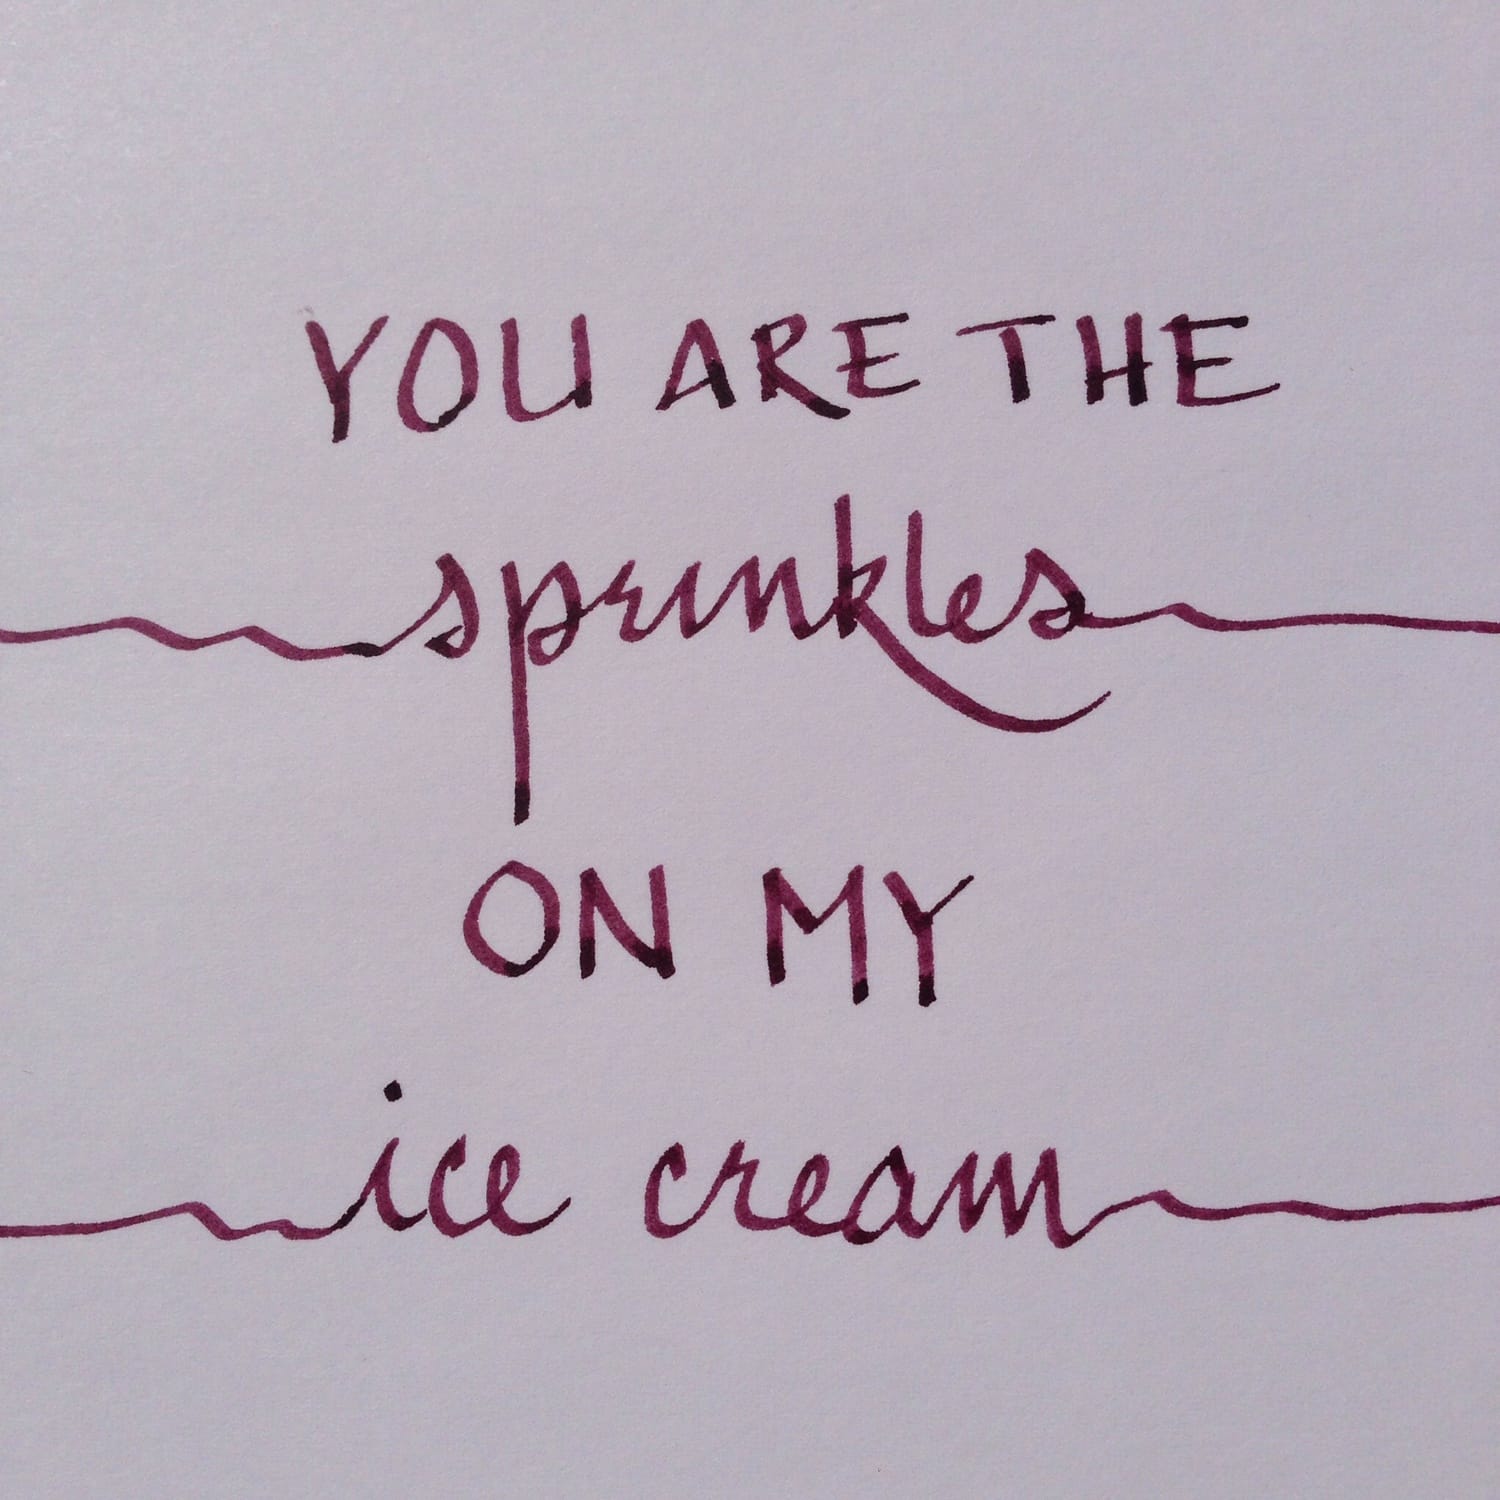 You are the sprinkles on my ice cream